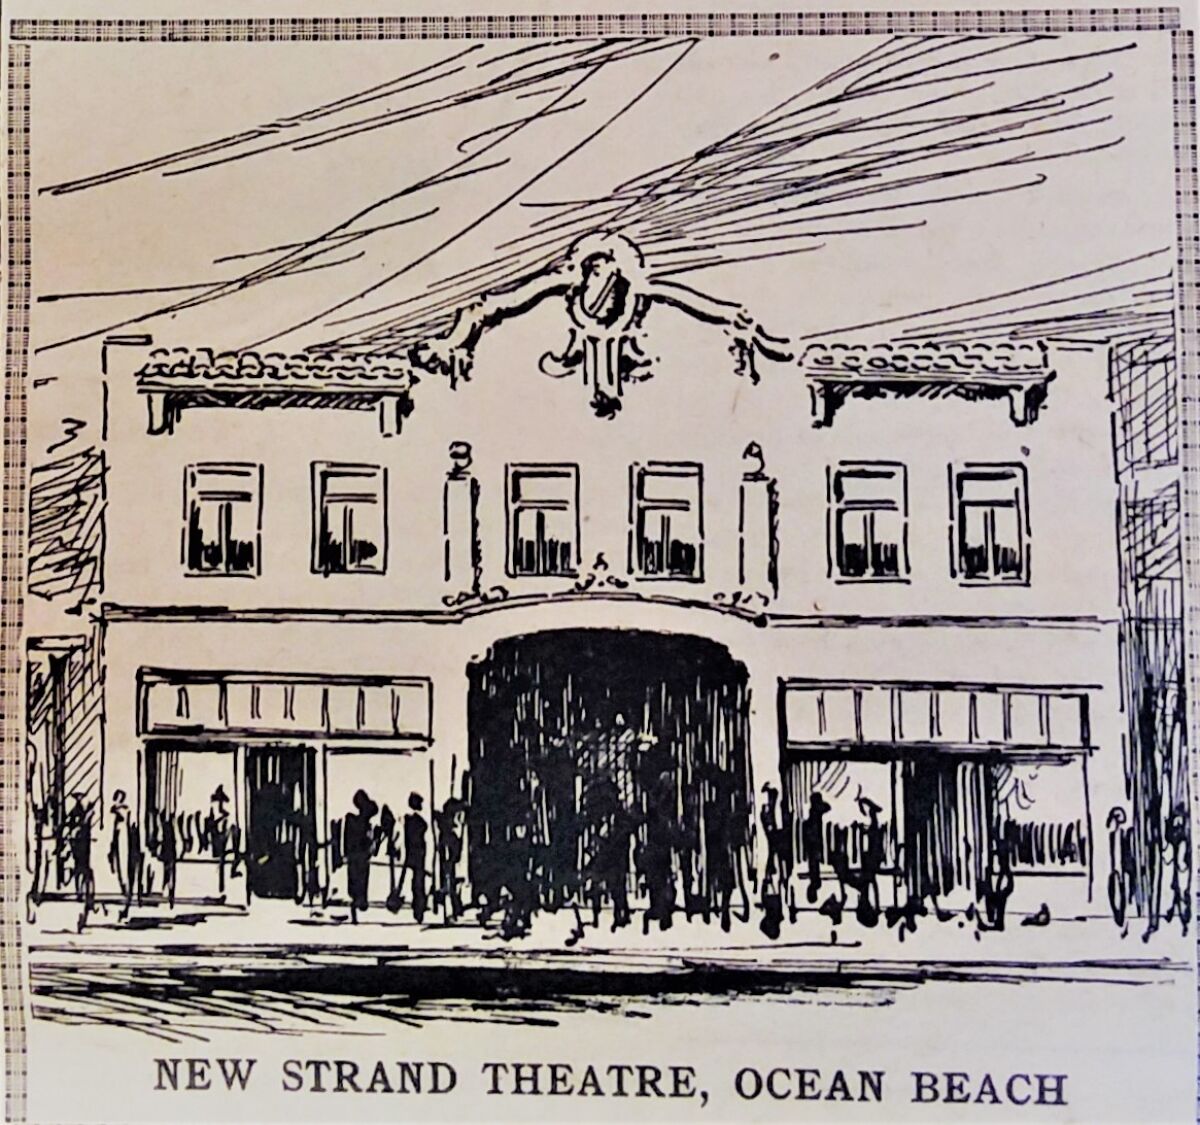 An artist’s rendering of the Strand Theatre in The Beach News in 1925.